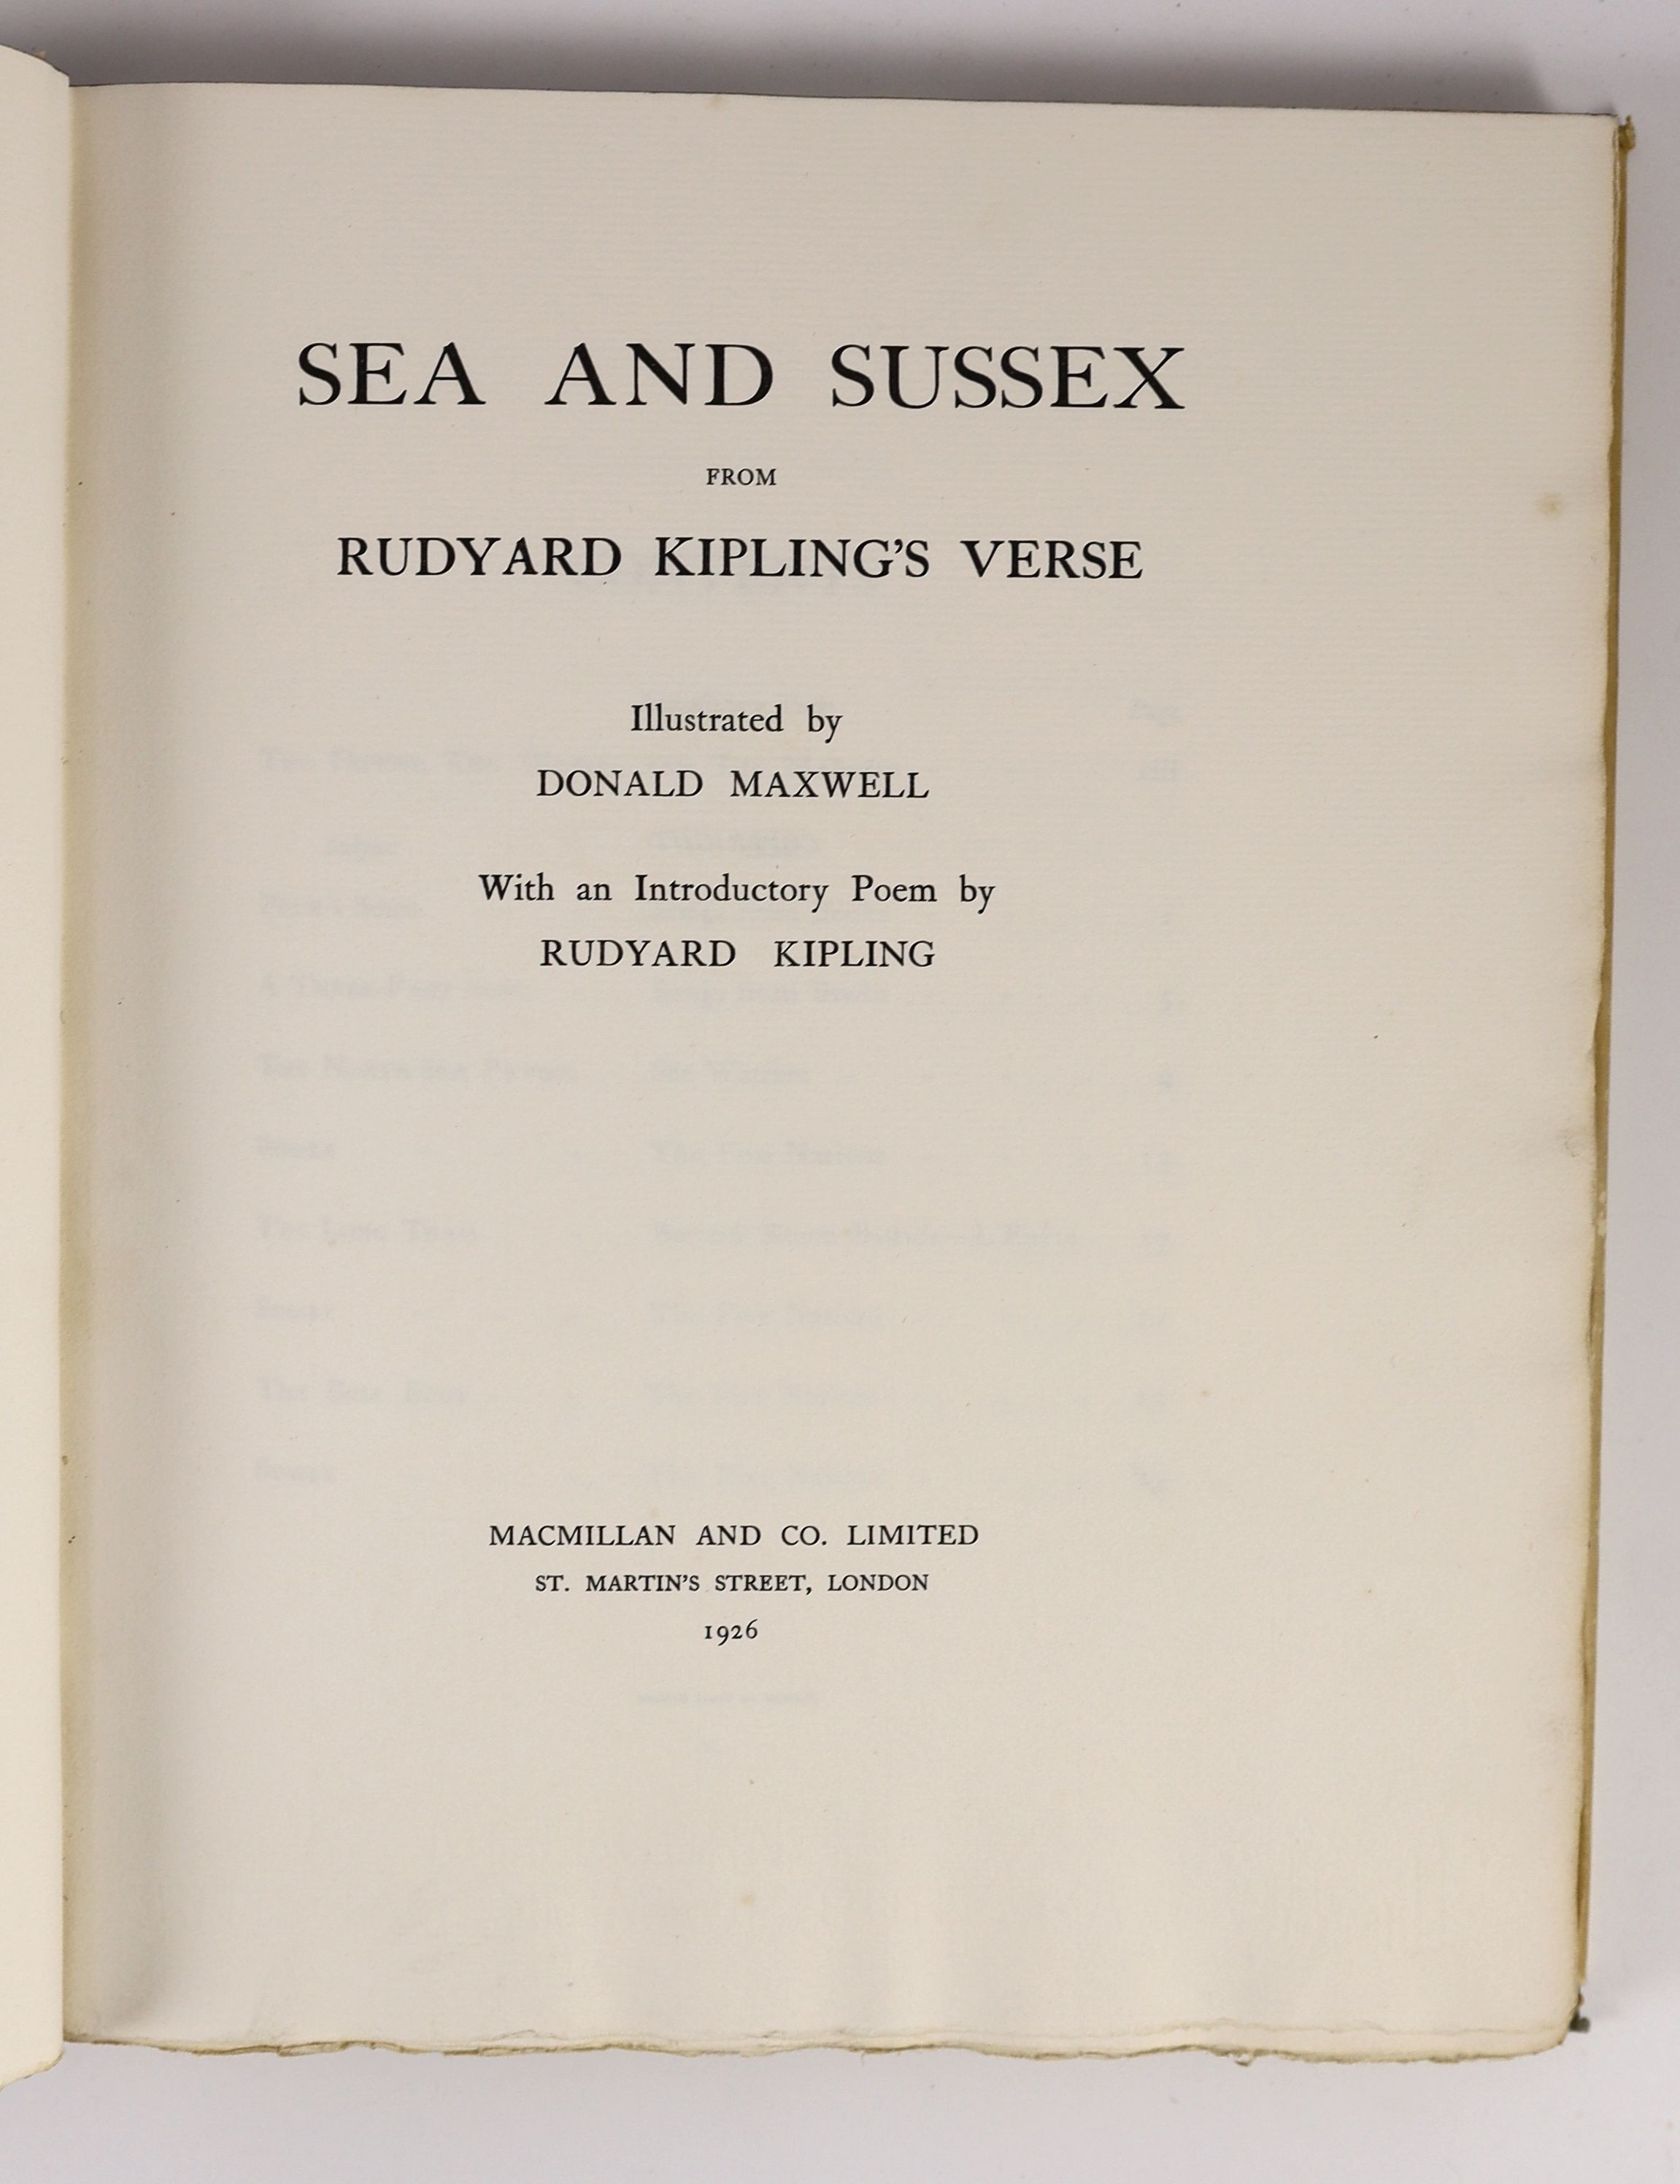 Kipling, Rudyard - Sea and Sussex, one of 500 signed by the author, illustrated with 24 mounted colour plates by Donald Maxwell, 4to, quarter vellum, in d/j, Macmillan and Co., Ltd, London, 1926, in slip case.